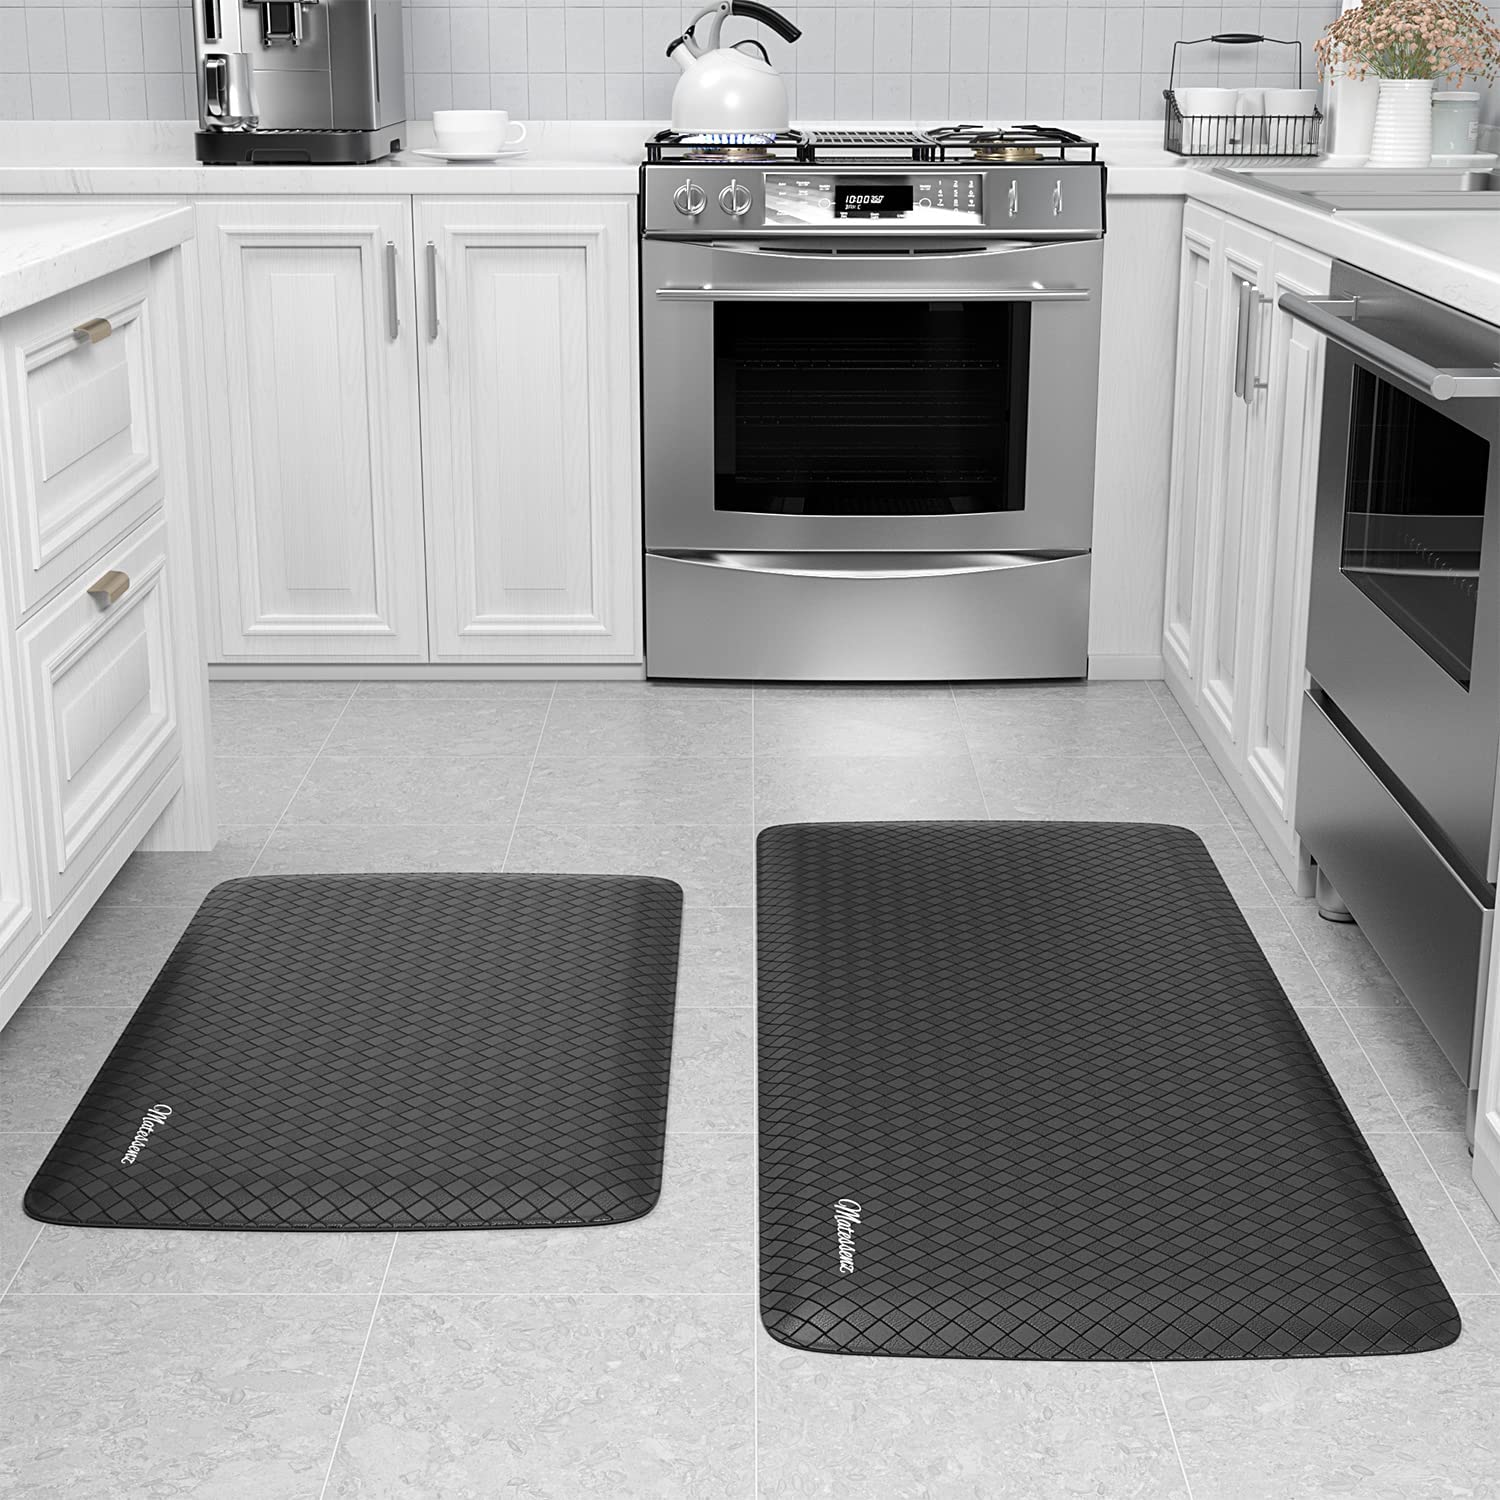 1/2 Inch Thick Cushioned Anti Fatigue Waterproof Kitchen Rug,17.3